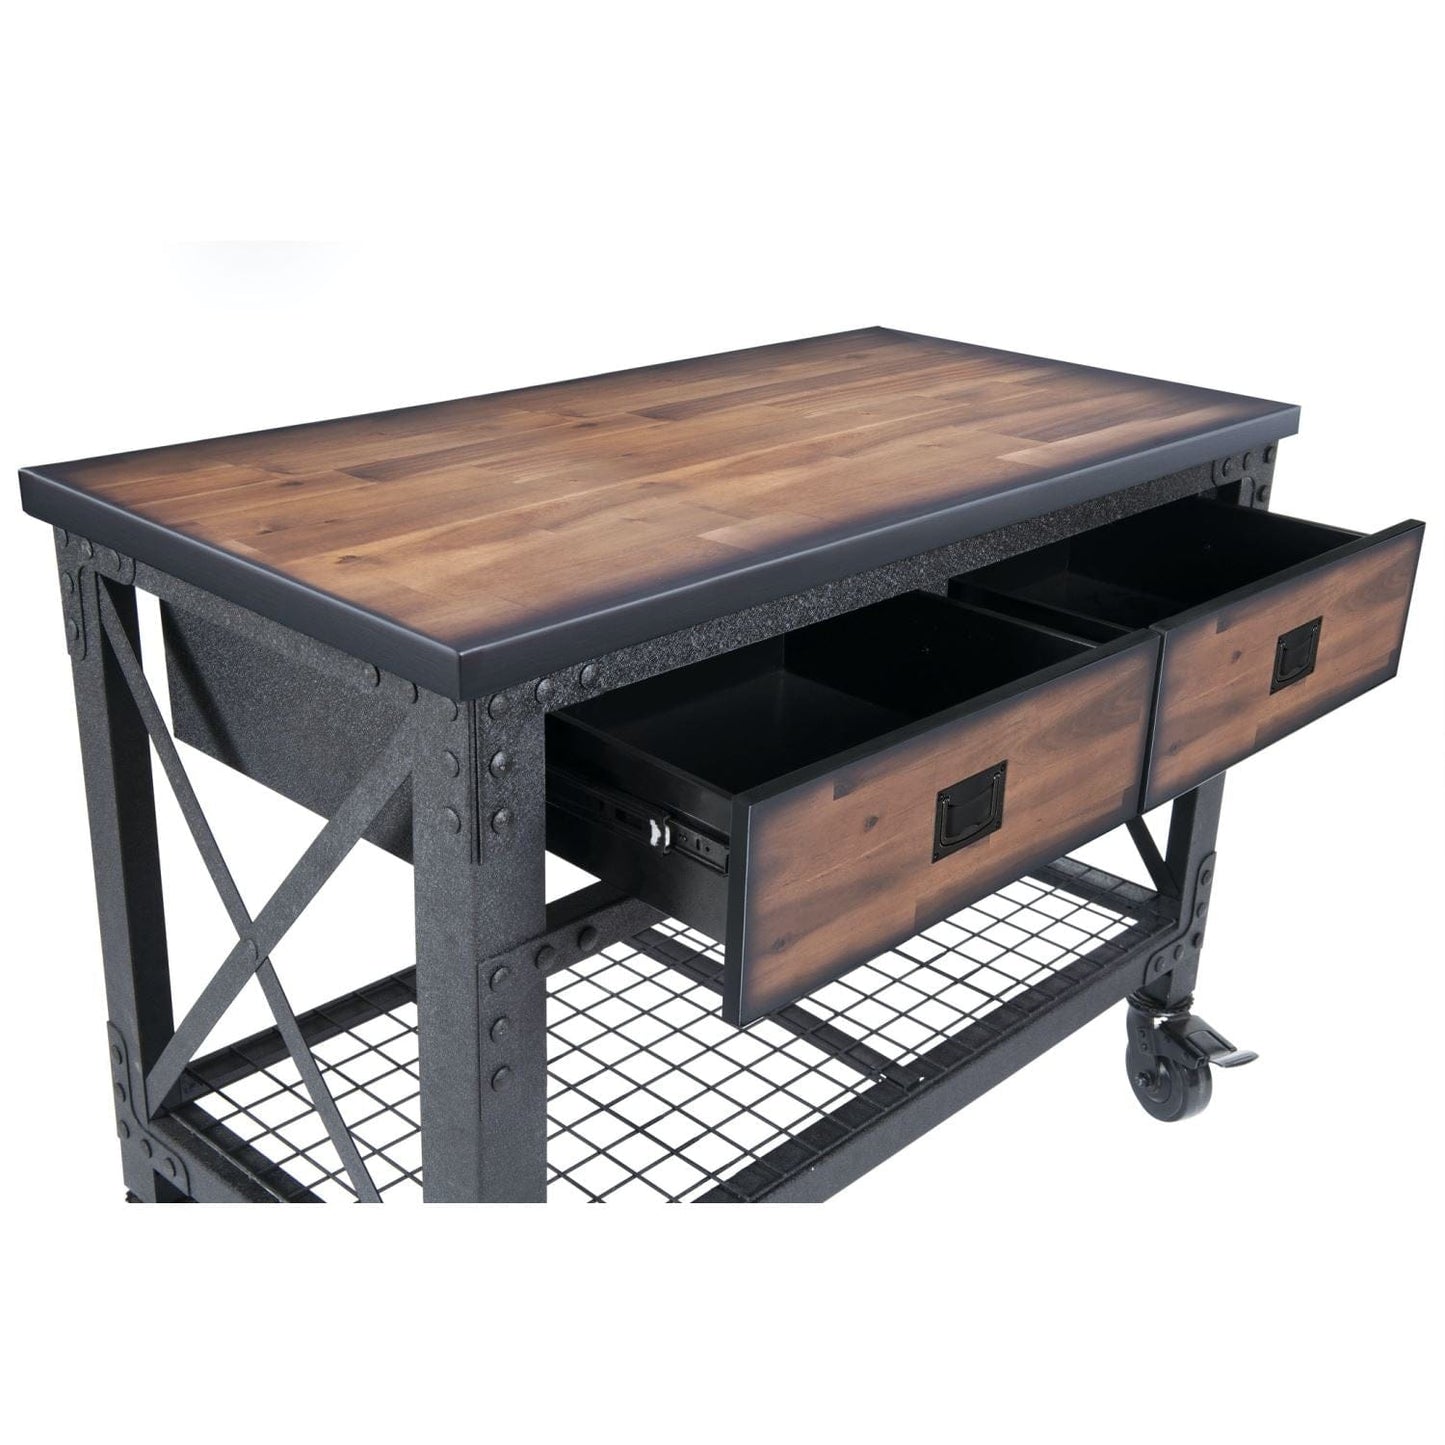 Duramax Furnitures DuraMax | 48 In x 24 In. 2 Drawer Rolling Industrial Workbench With Wood Top 68002